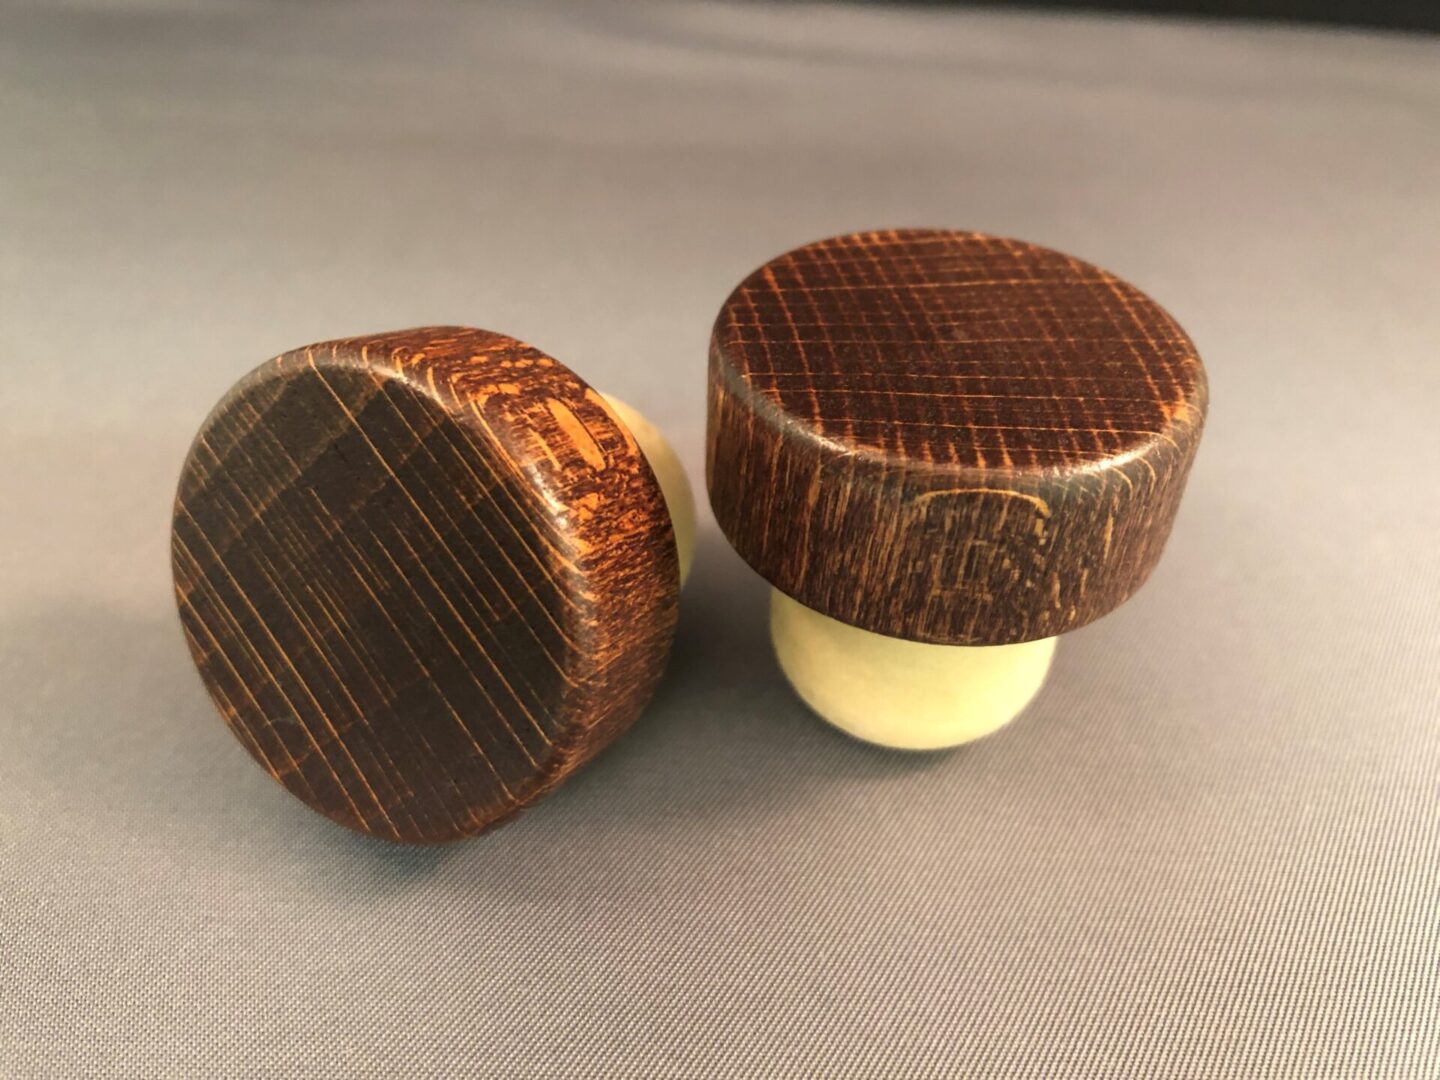 Two Red Mahogany 34x14/22.5 wine stoppers on a grey surface.